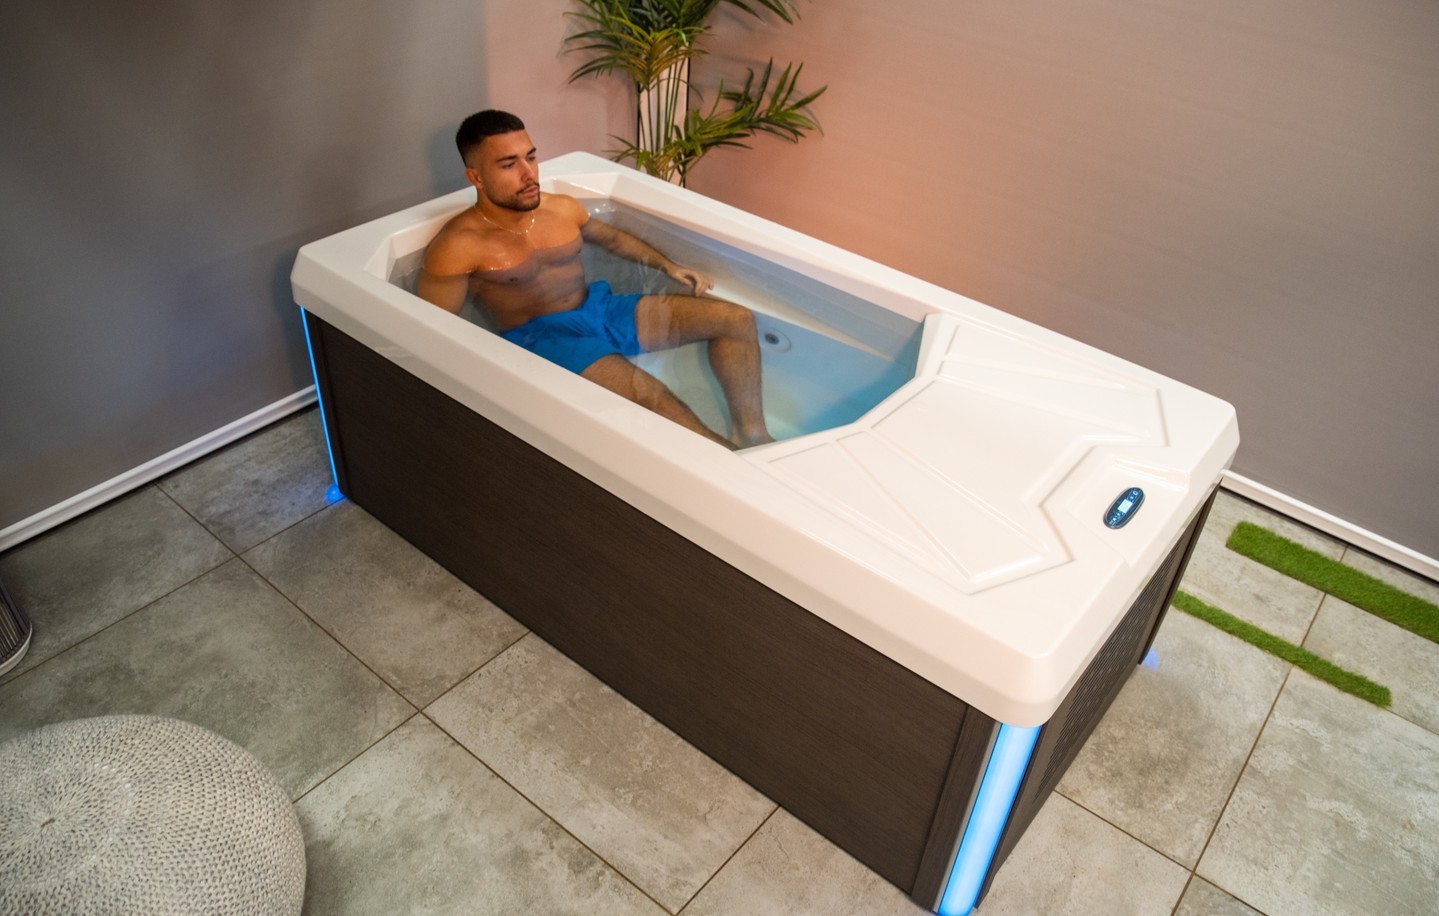 Introducing the Chill Tubs Pro       The ultimate cold plunge experience.   With its impressive features  durability  and luxurious aesthetics  it is ideal for home and commercial environments.   The spacious Chill Tubs Pro has been designed with comfort in mind. With a dedicated seat and armrests  it sets to deliver high performance and style.   If you are serious about cold water therapy  then the Chill Tub Pro is for you.   Head over to our website to register your interest - LINK IN BIO        #chilltub #chilltubs #chilltubspro #icebath #coldplunge #coldwatertherapy #coldwaterimmersion